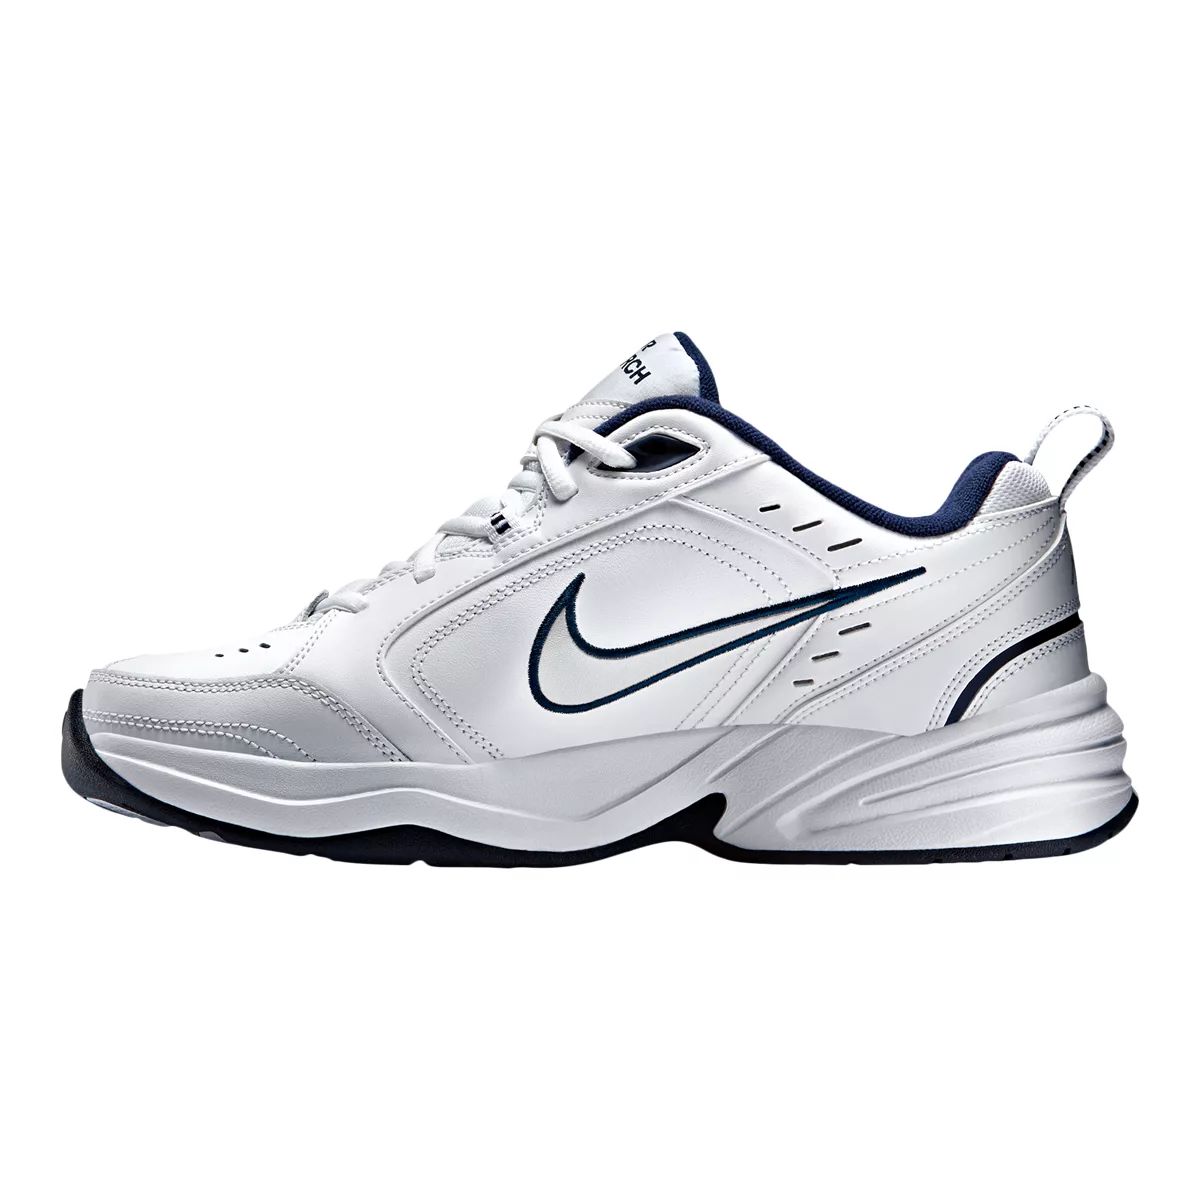 Nike Men's Air Monarch IV Training Shoes, Cushioned, Lightweight